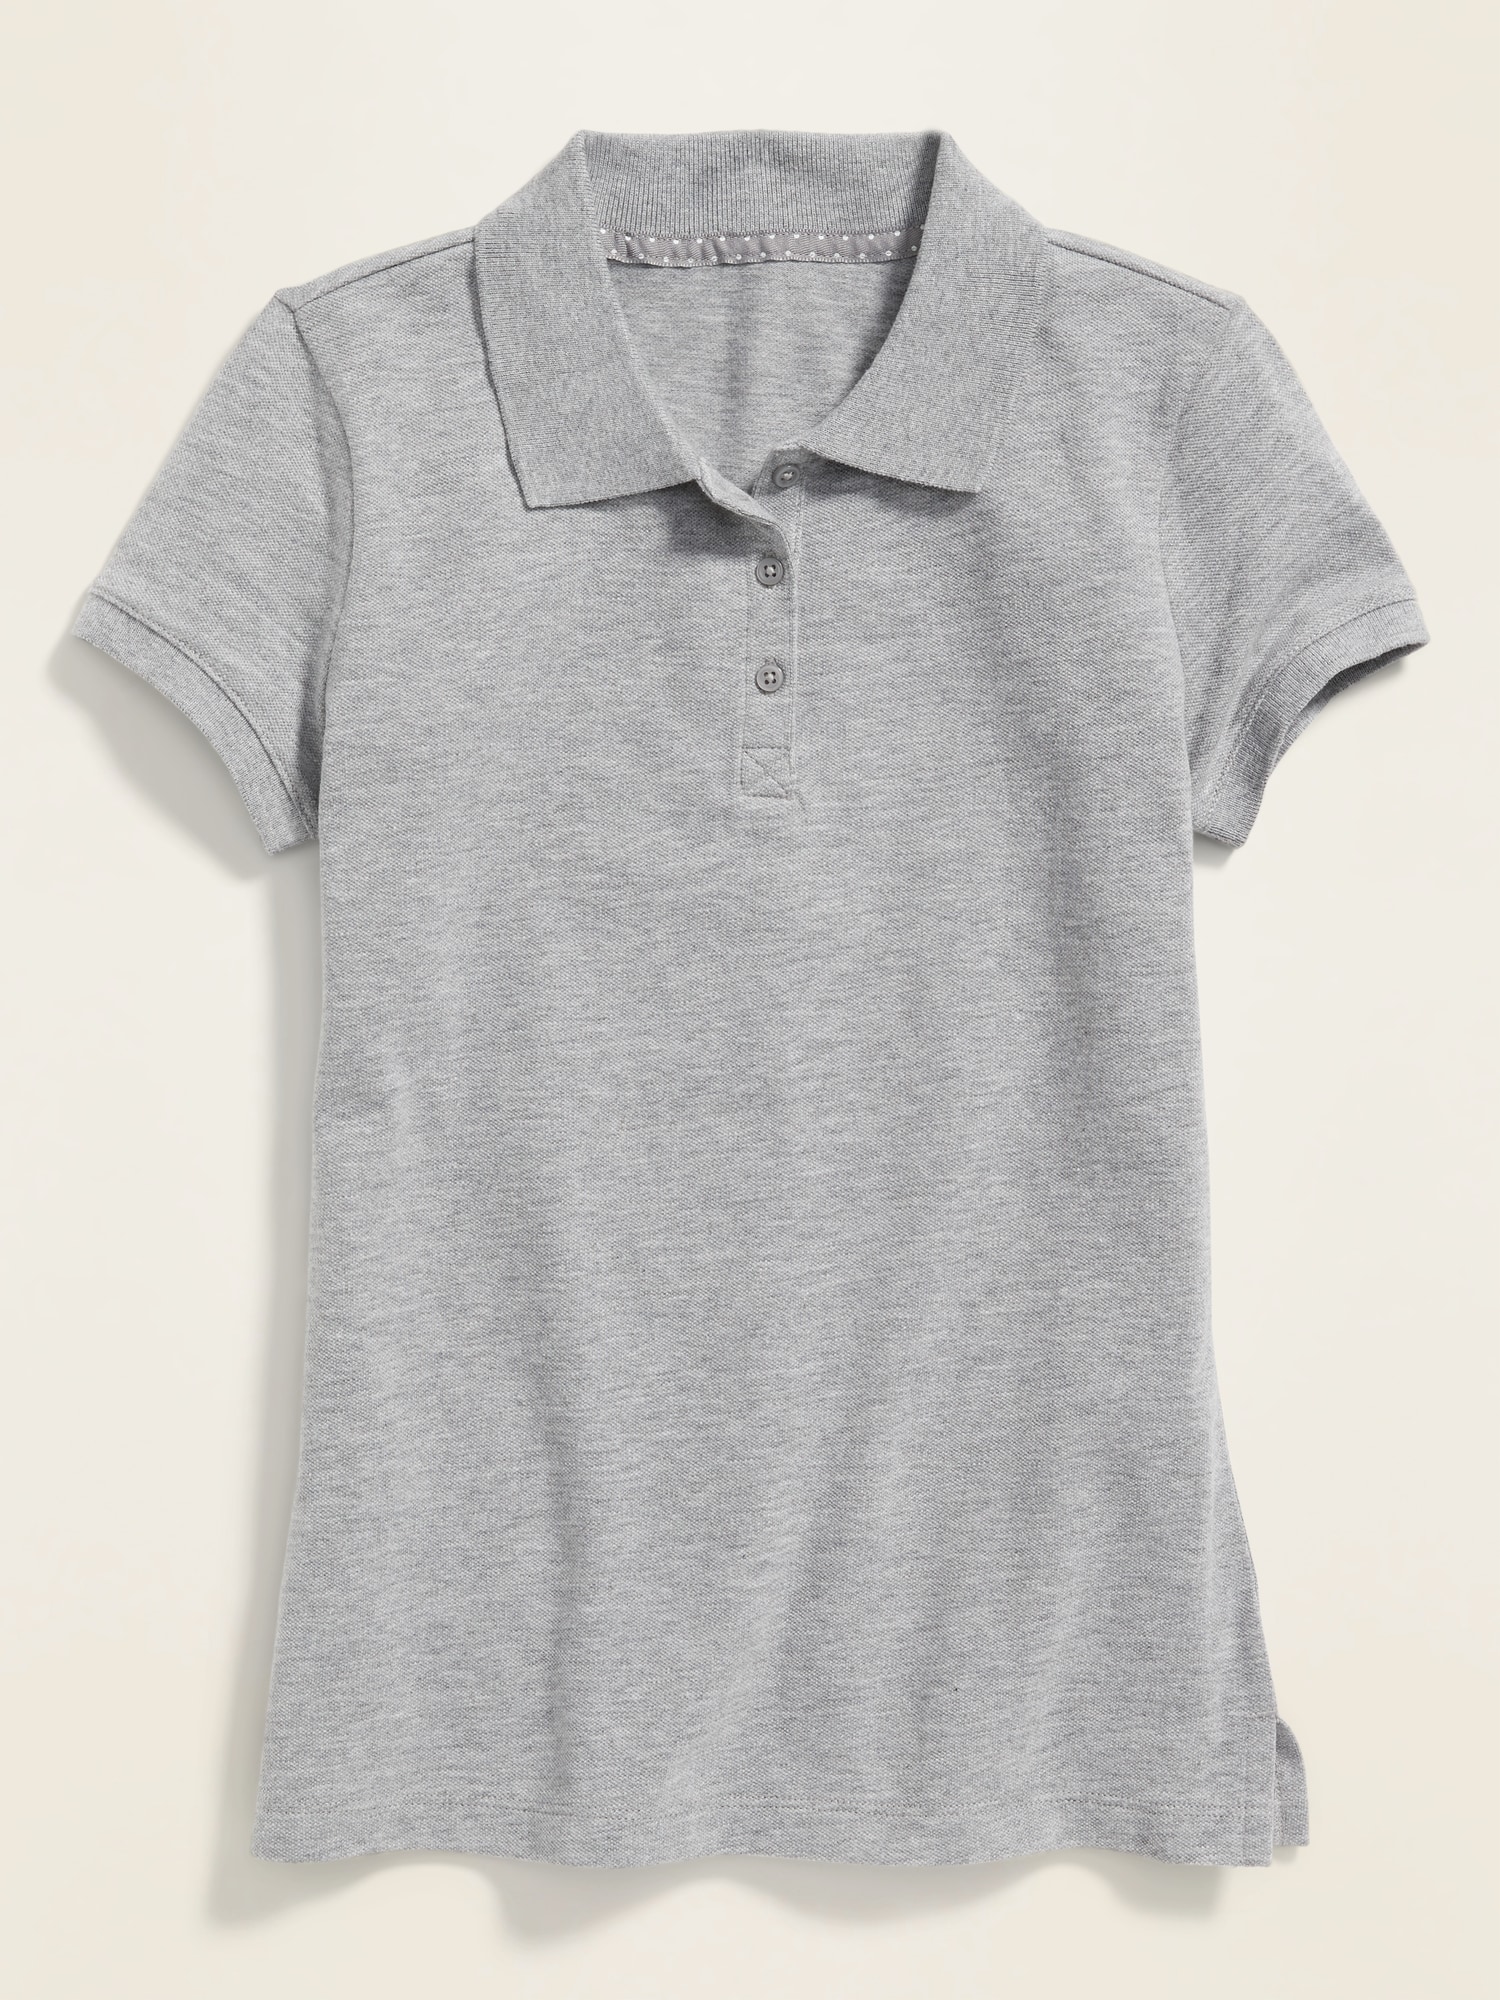 Ciao Short Sleeve Navy//Sky Tipped 1//4 Zip Polo Large £85 RRP